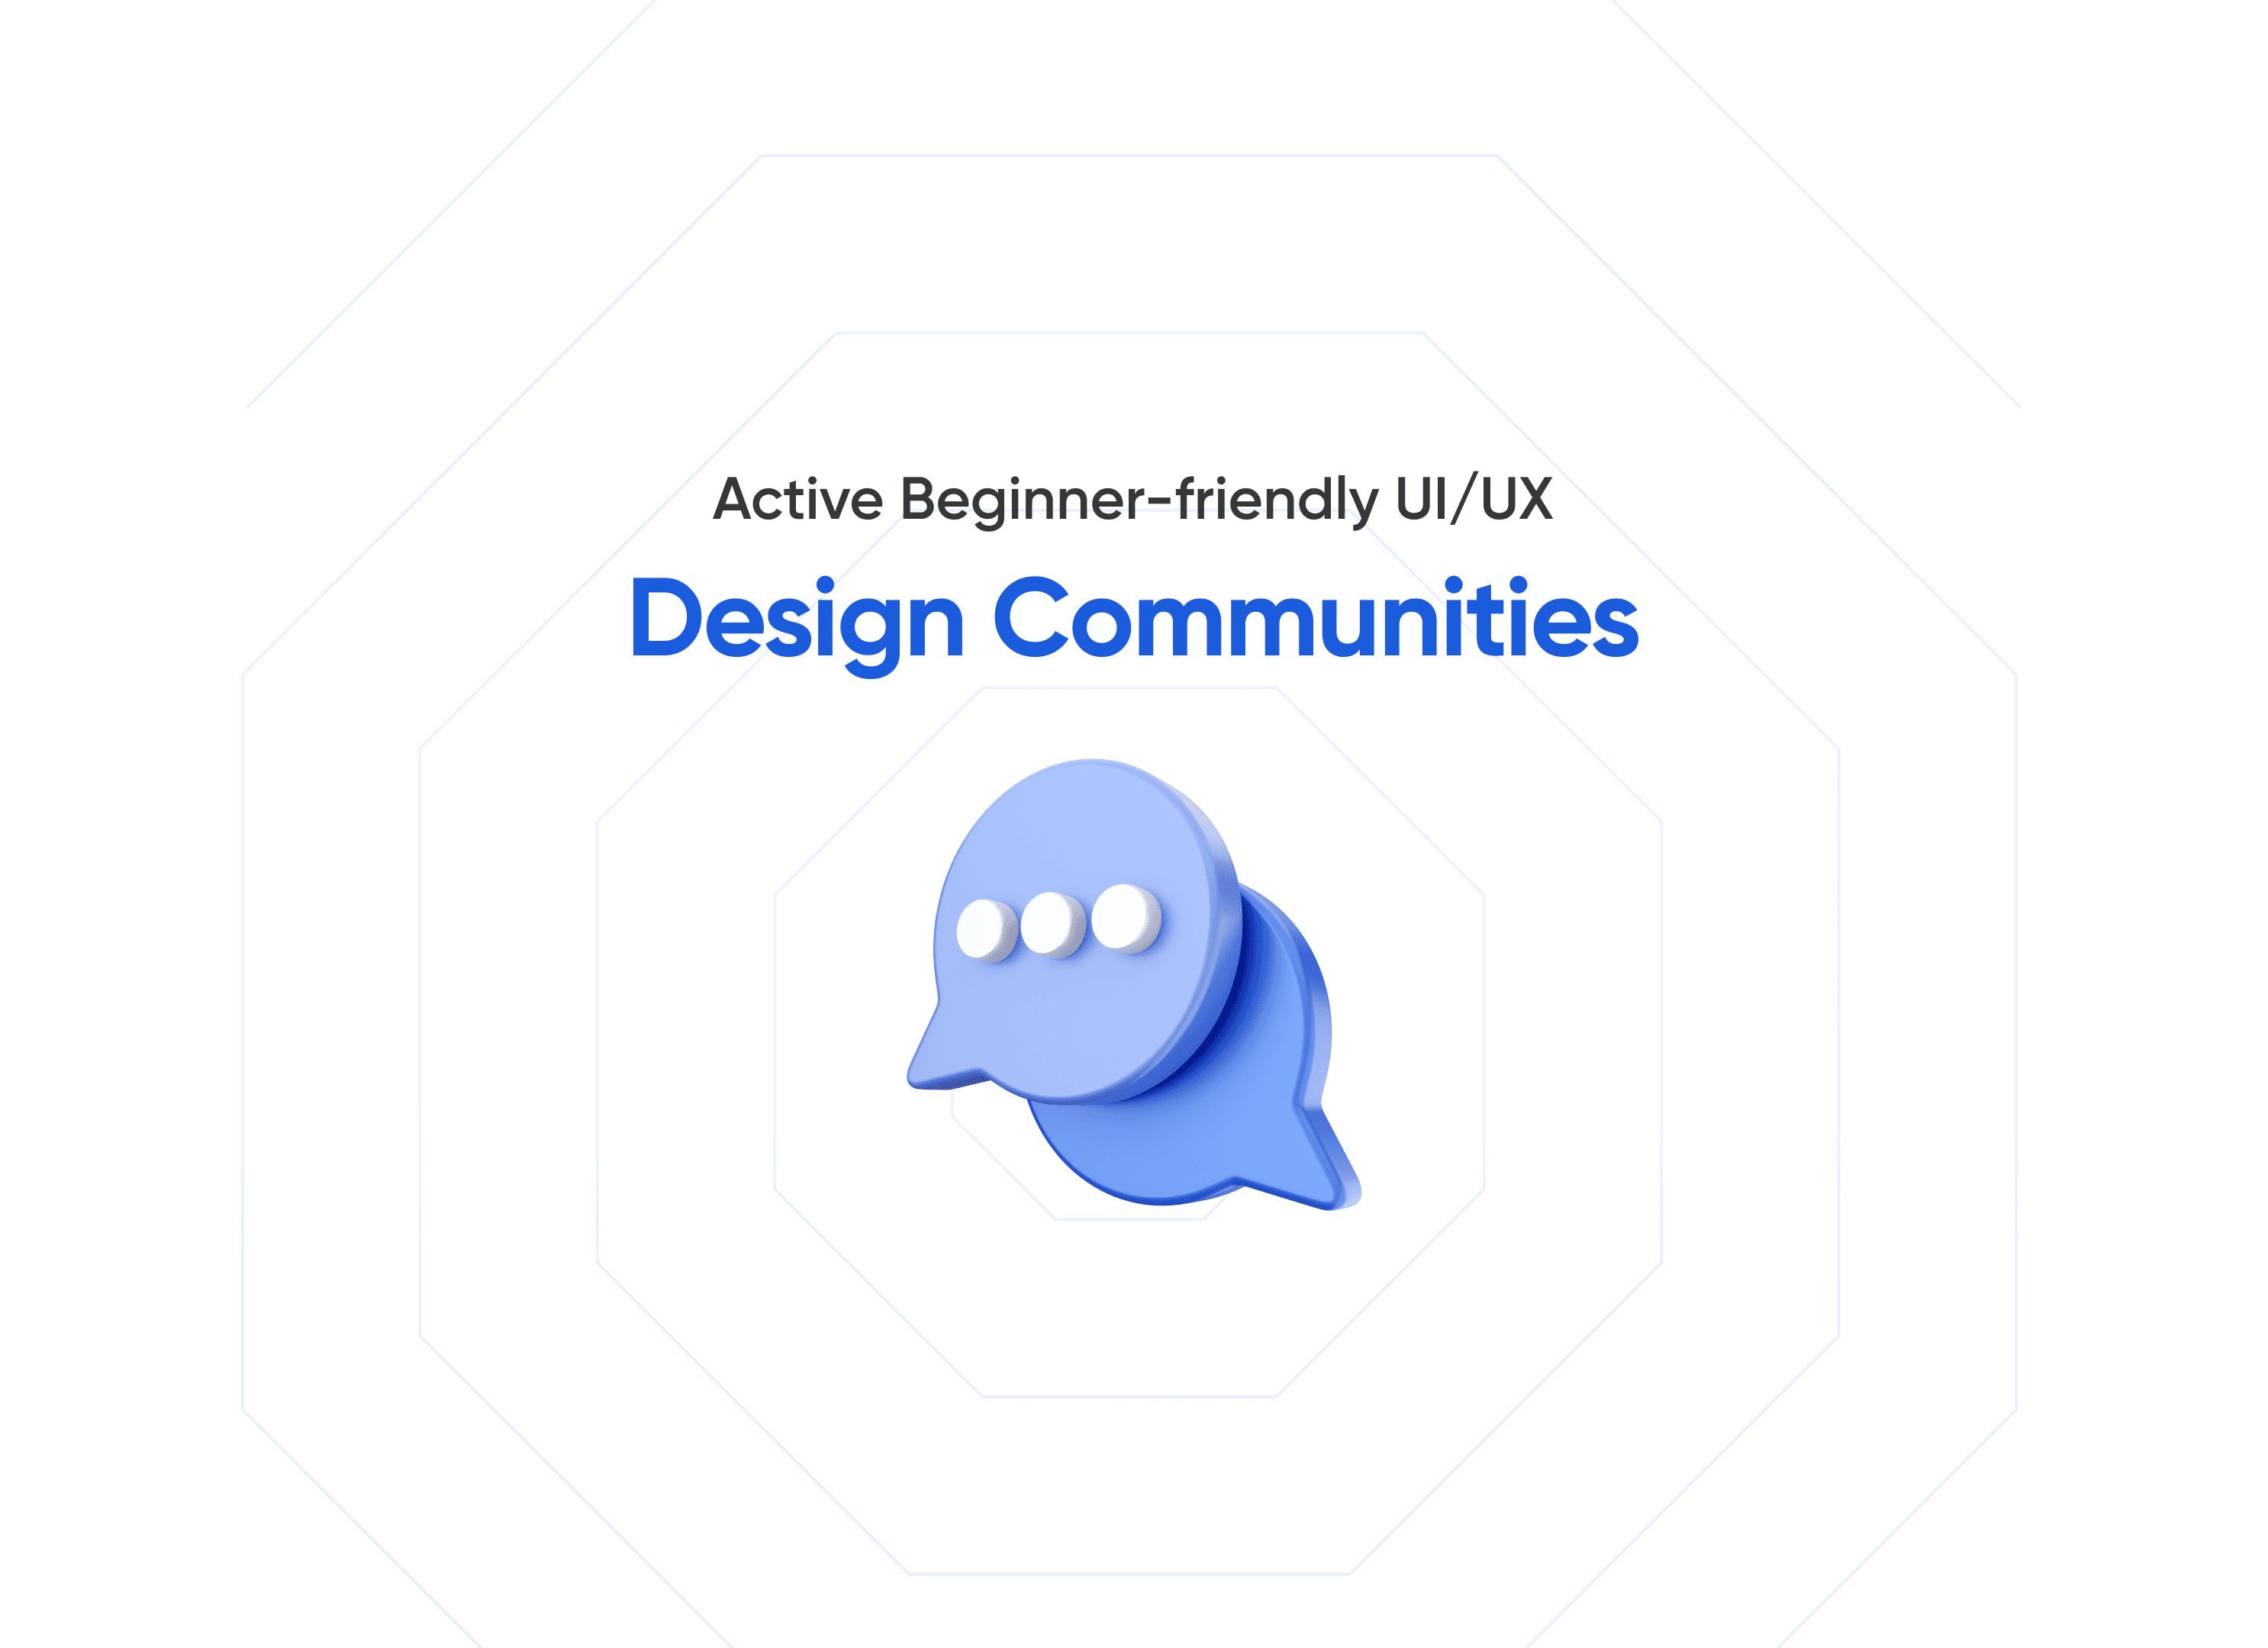 Design Communities are important to grow!